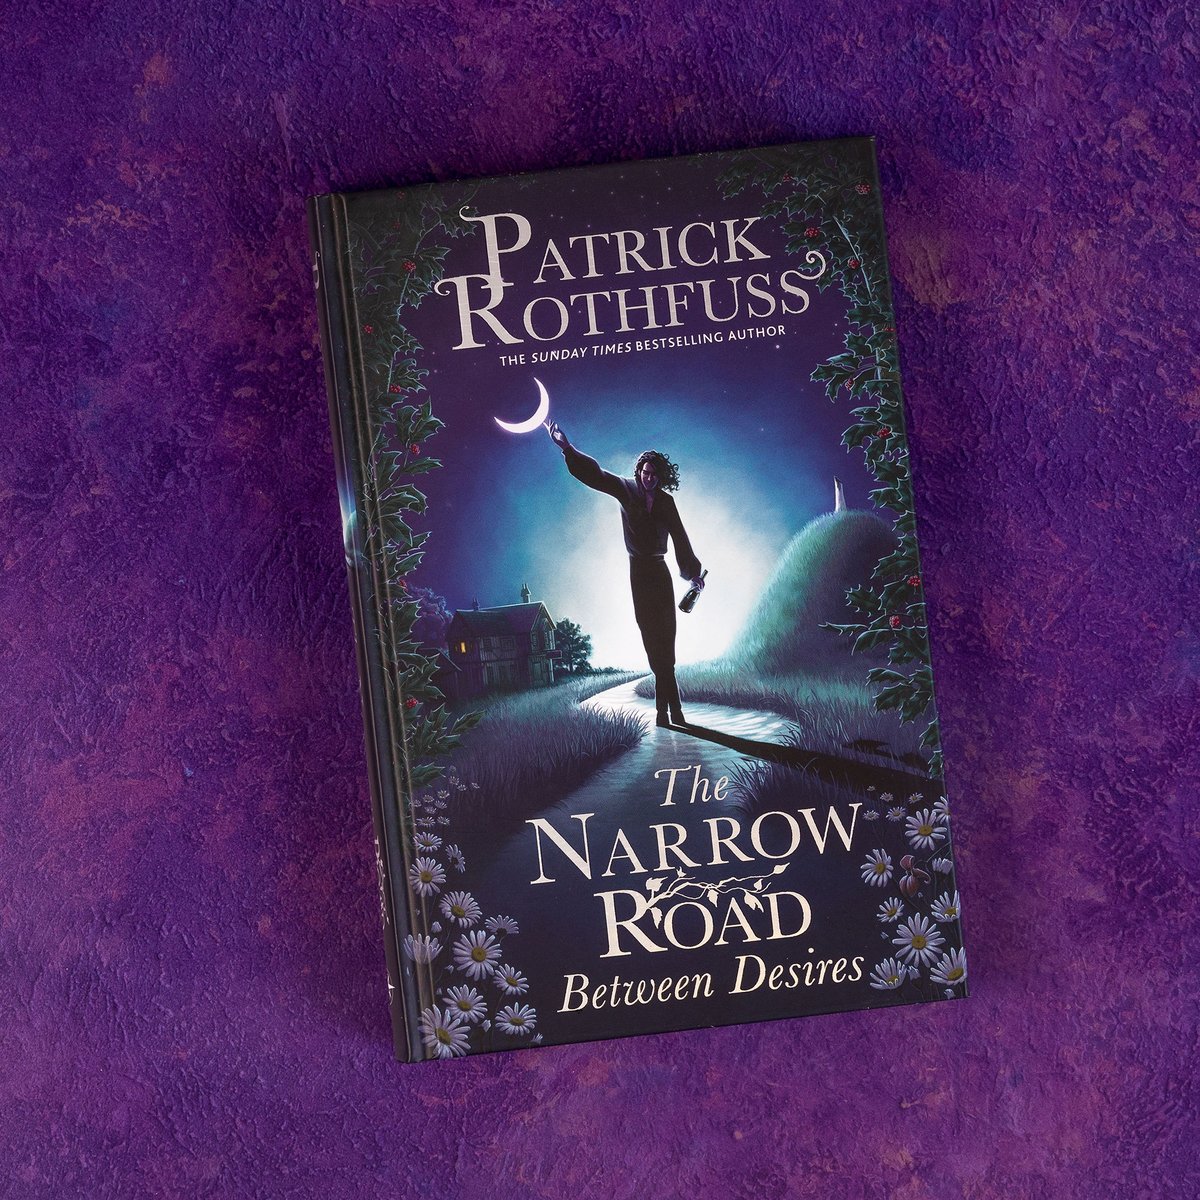 Magic. Mischief. Danger. Adventure. Discover @PatrickRothfuss' Kingkiller universe like never before with this must-read, fully illustrated novella following everyone's favourite fae, Bast. Out now: geni.us/TheNarrowRoad